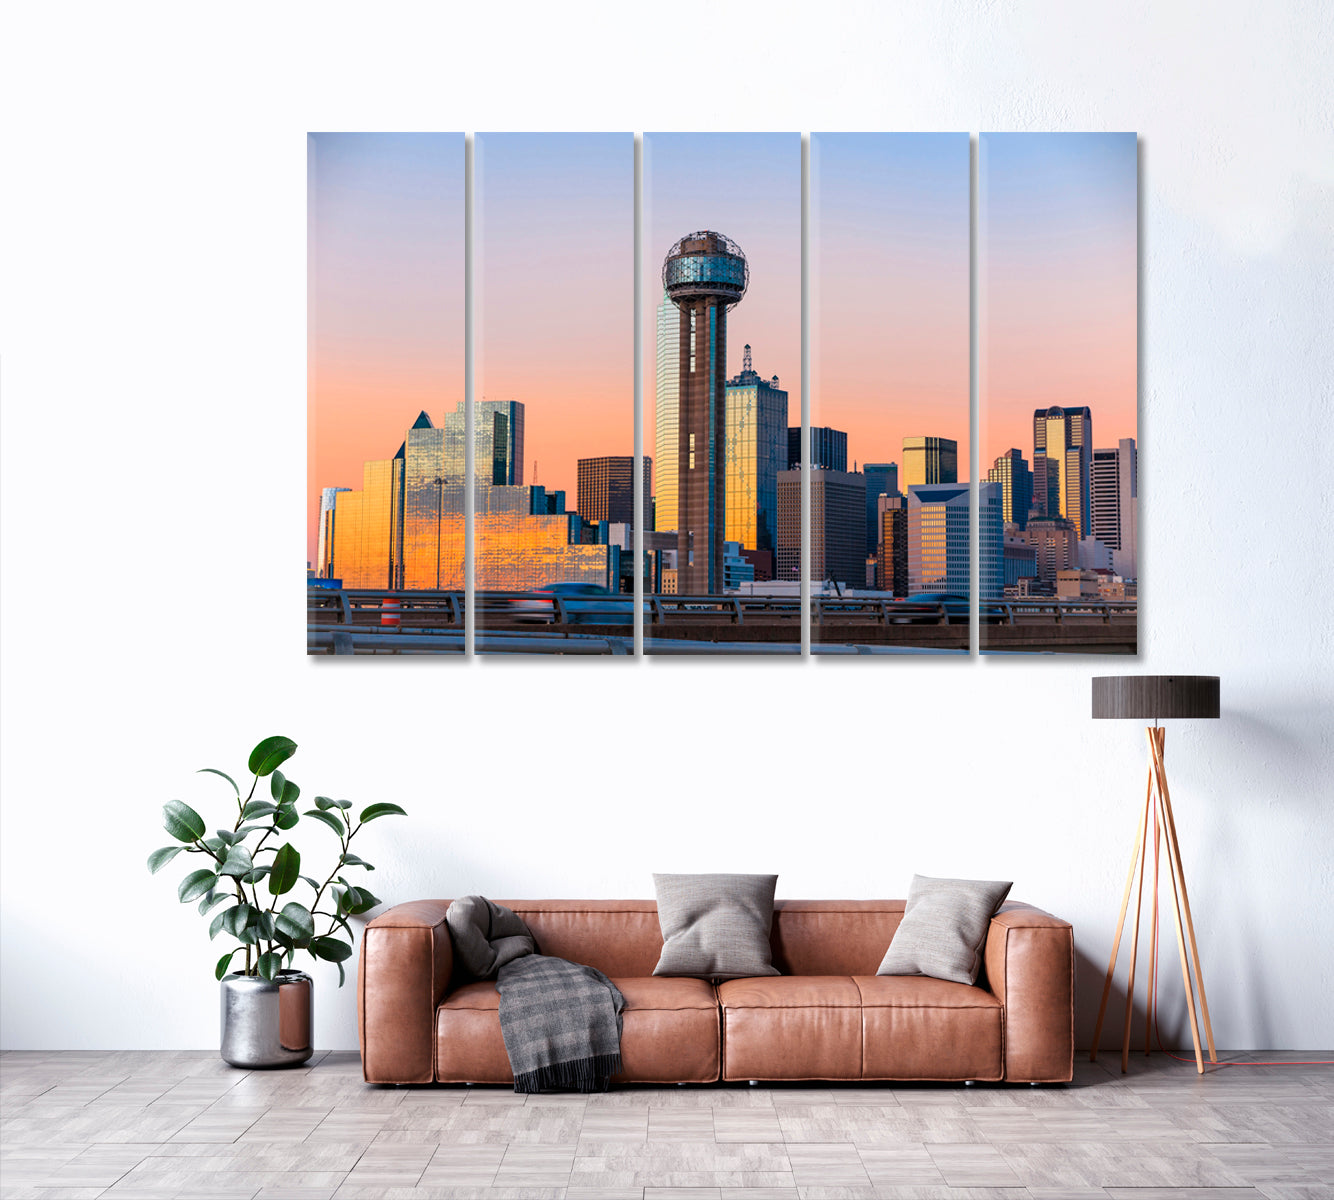 Dallas Skyscrapers at Dusk Canvas Print ArtLexy 5 Panels 36"x24" inches 